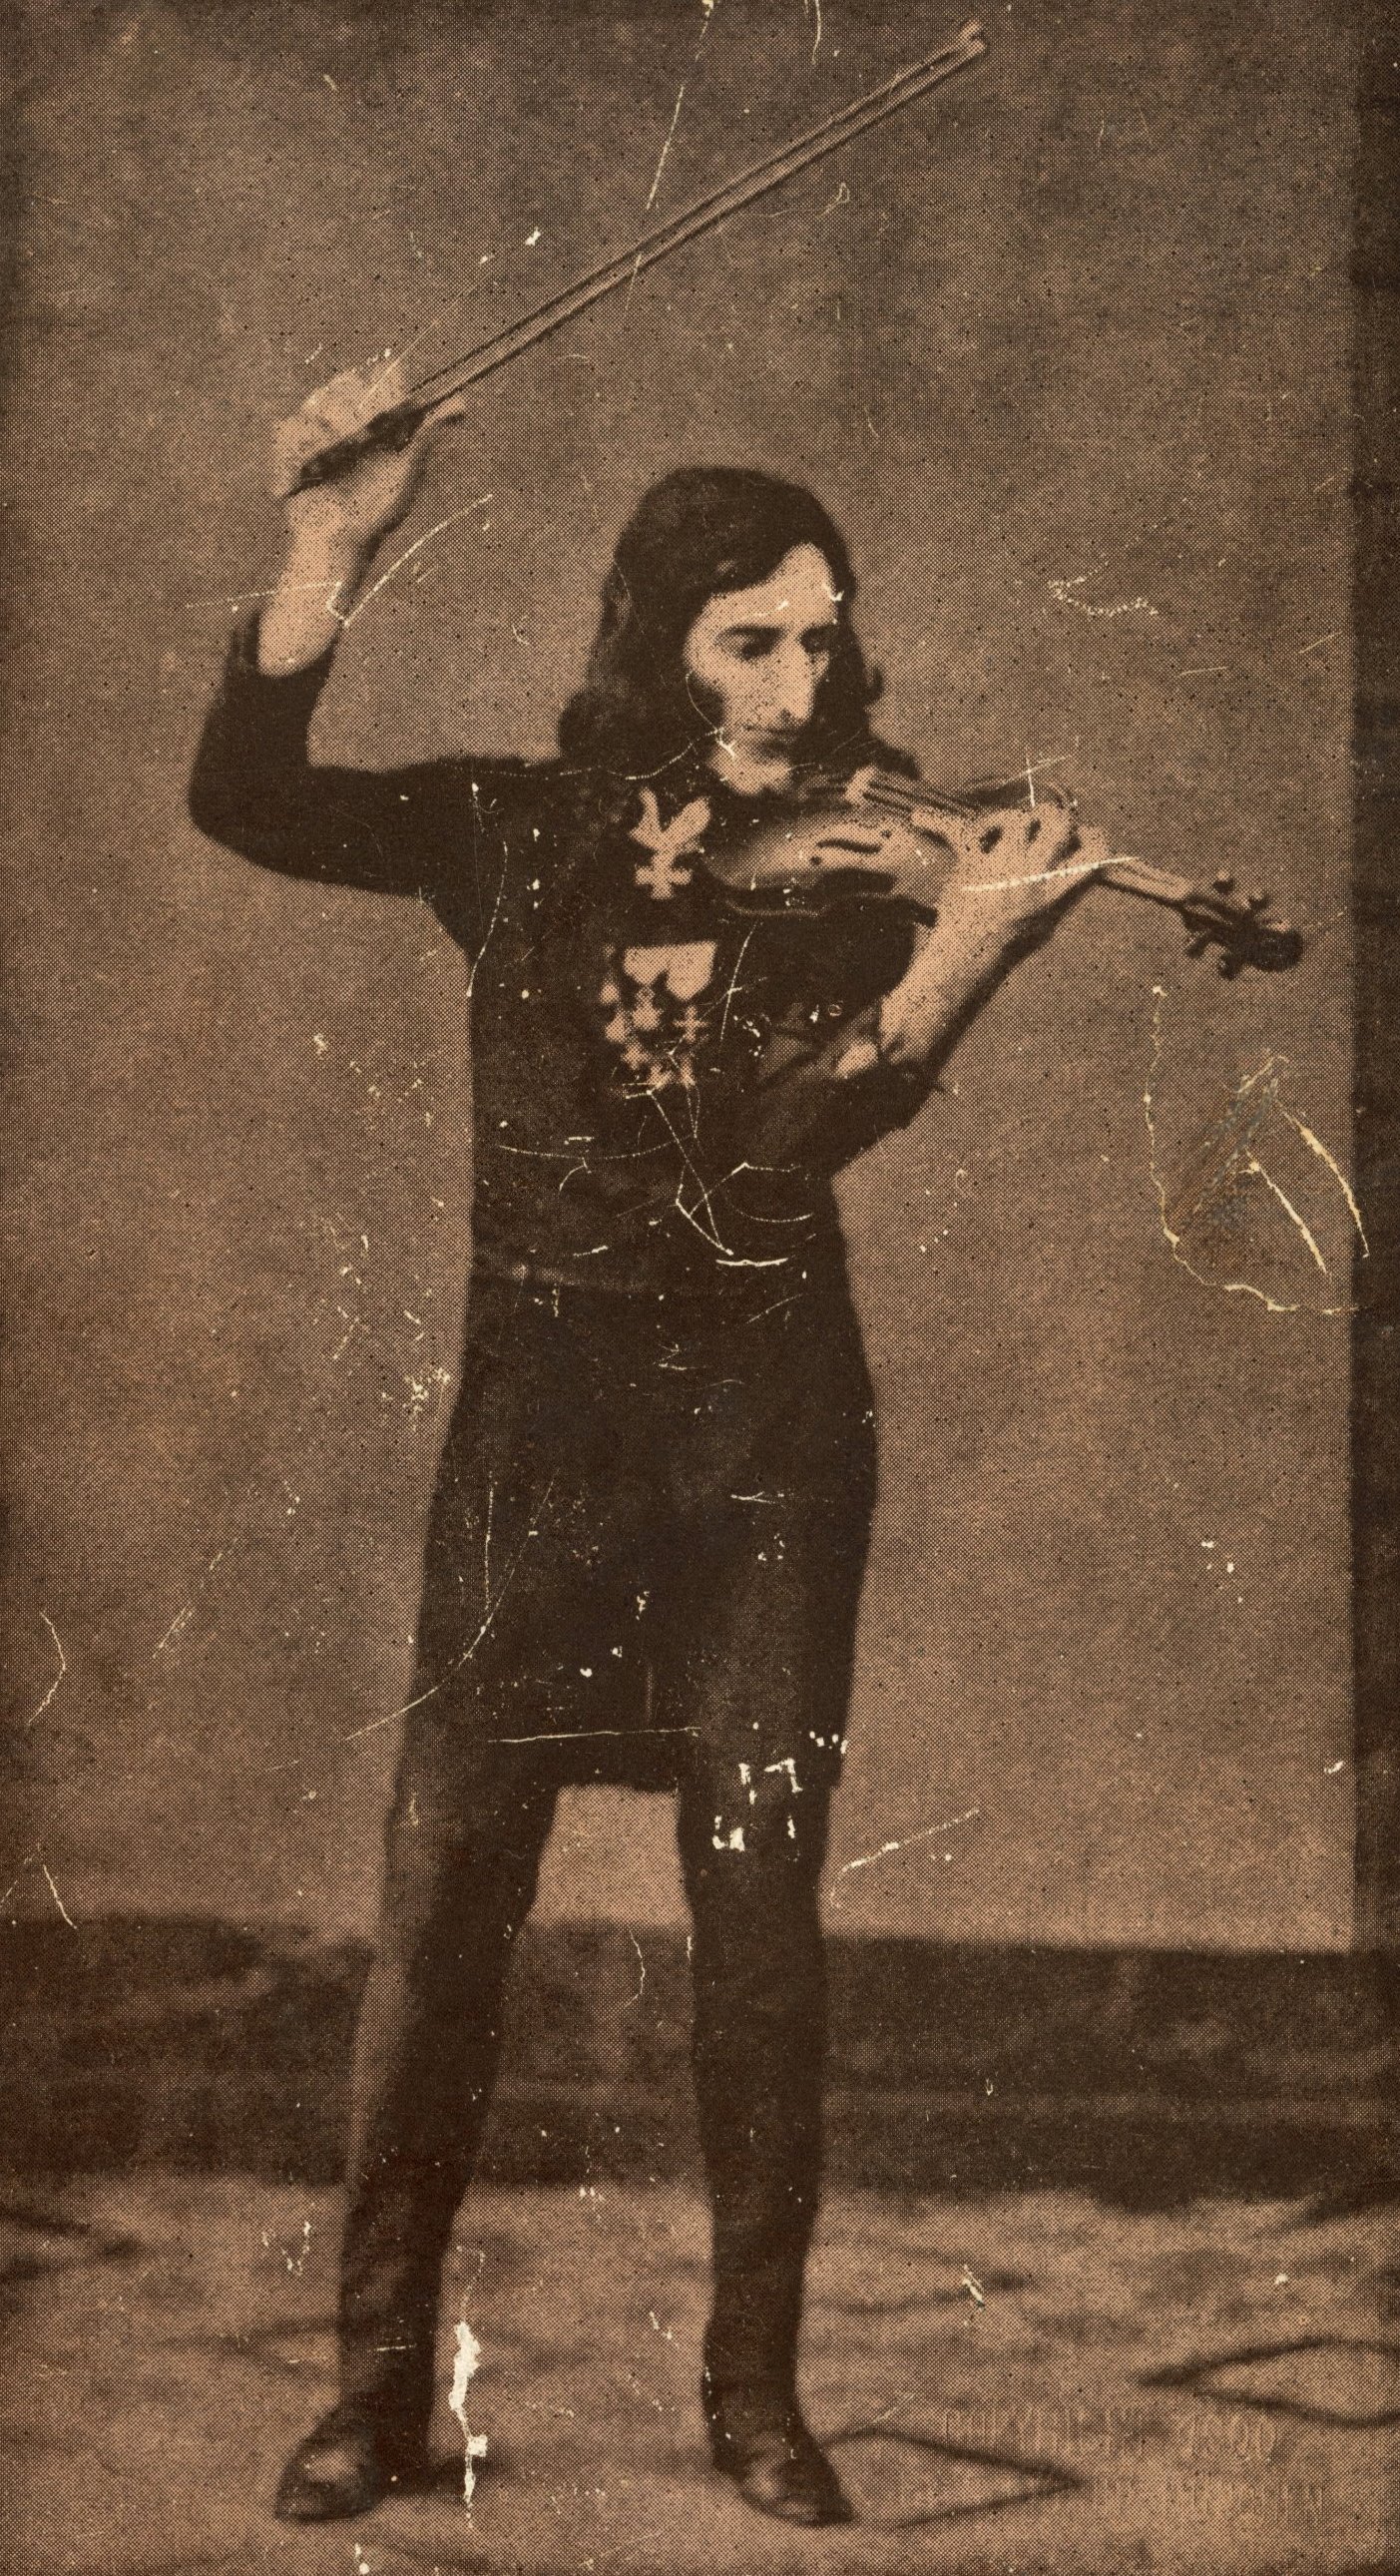  Niccolo Paganini (1782-1840) was the most celebrated violin virtuoso. I have come to believe that Niccolo was my 7th grandfather and upon the death of my father I inherited Paganini’s memorabilia,  and some of his personal belongings.  In an attempt